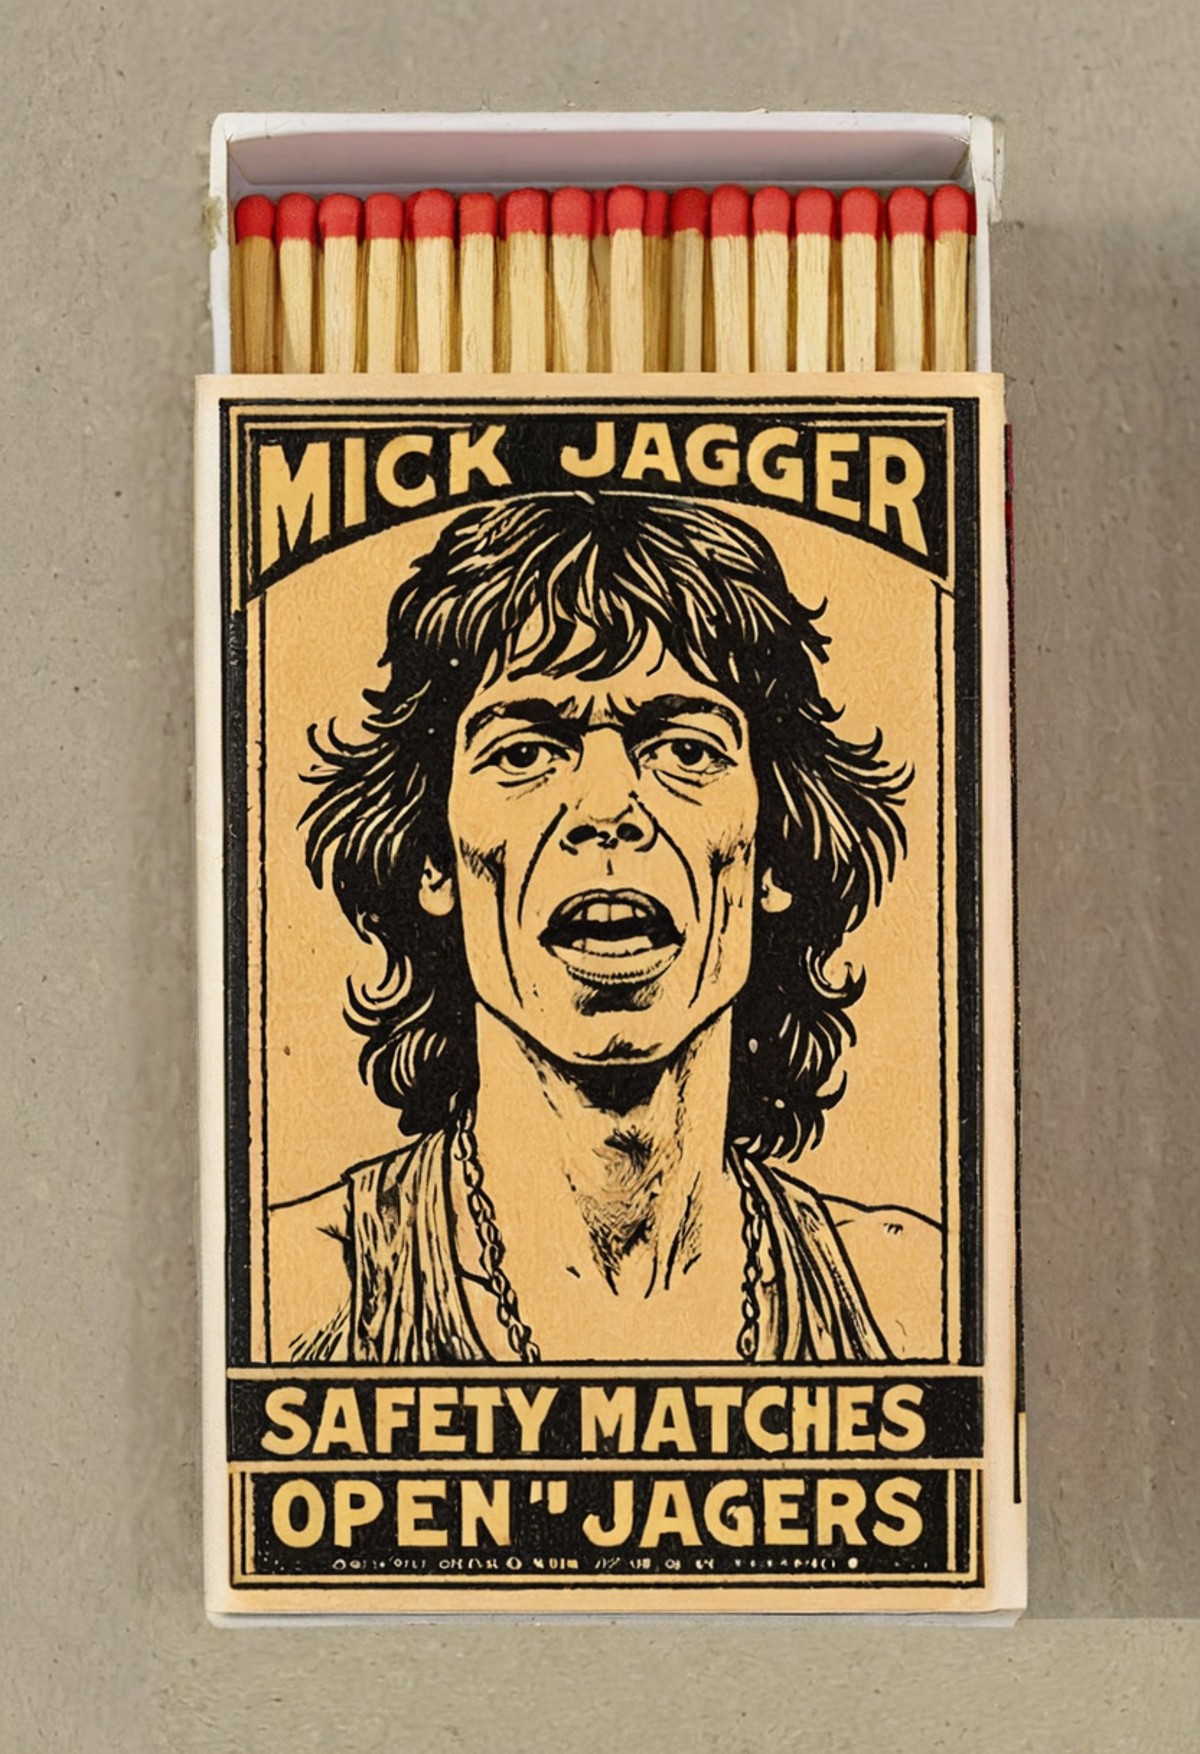 vintage_safety_matches_open_matchbox_called__mick_jagger___detailed_woodcut_illustration_of__mick_jagger_0_4__loitering_around_-hyperrealistic_photograph__8k__photoshop__2876340827.png